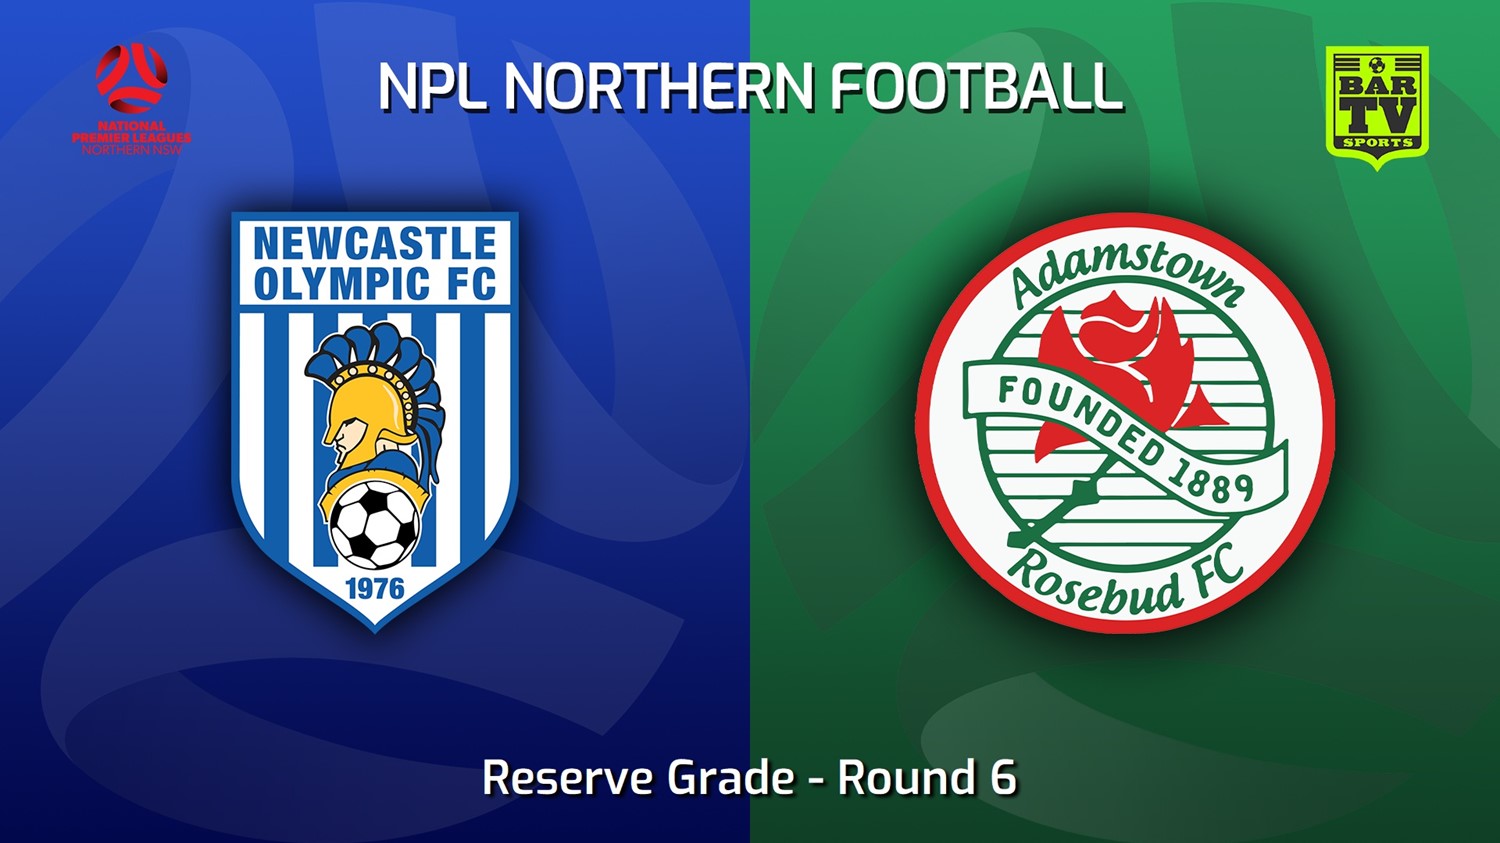 230410-NNSW NPLM Res Round 6 - Newcastle Olympic Res v Adamstown Rosebud FC Res Minigame Slate Image